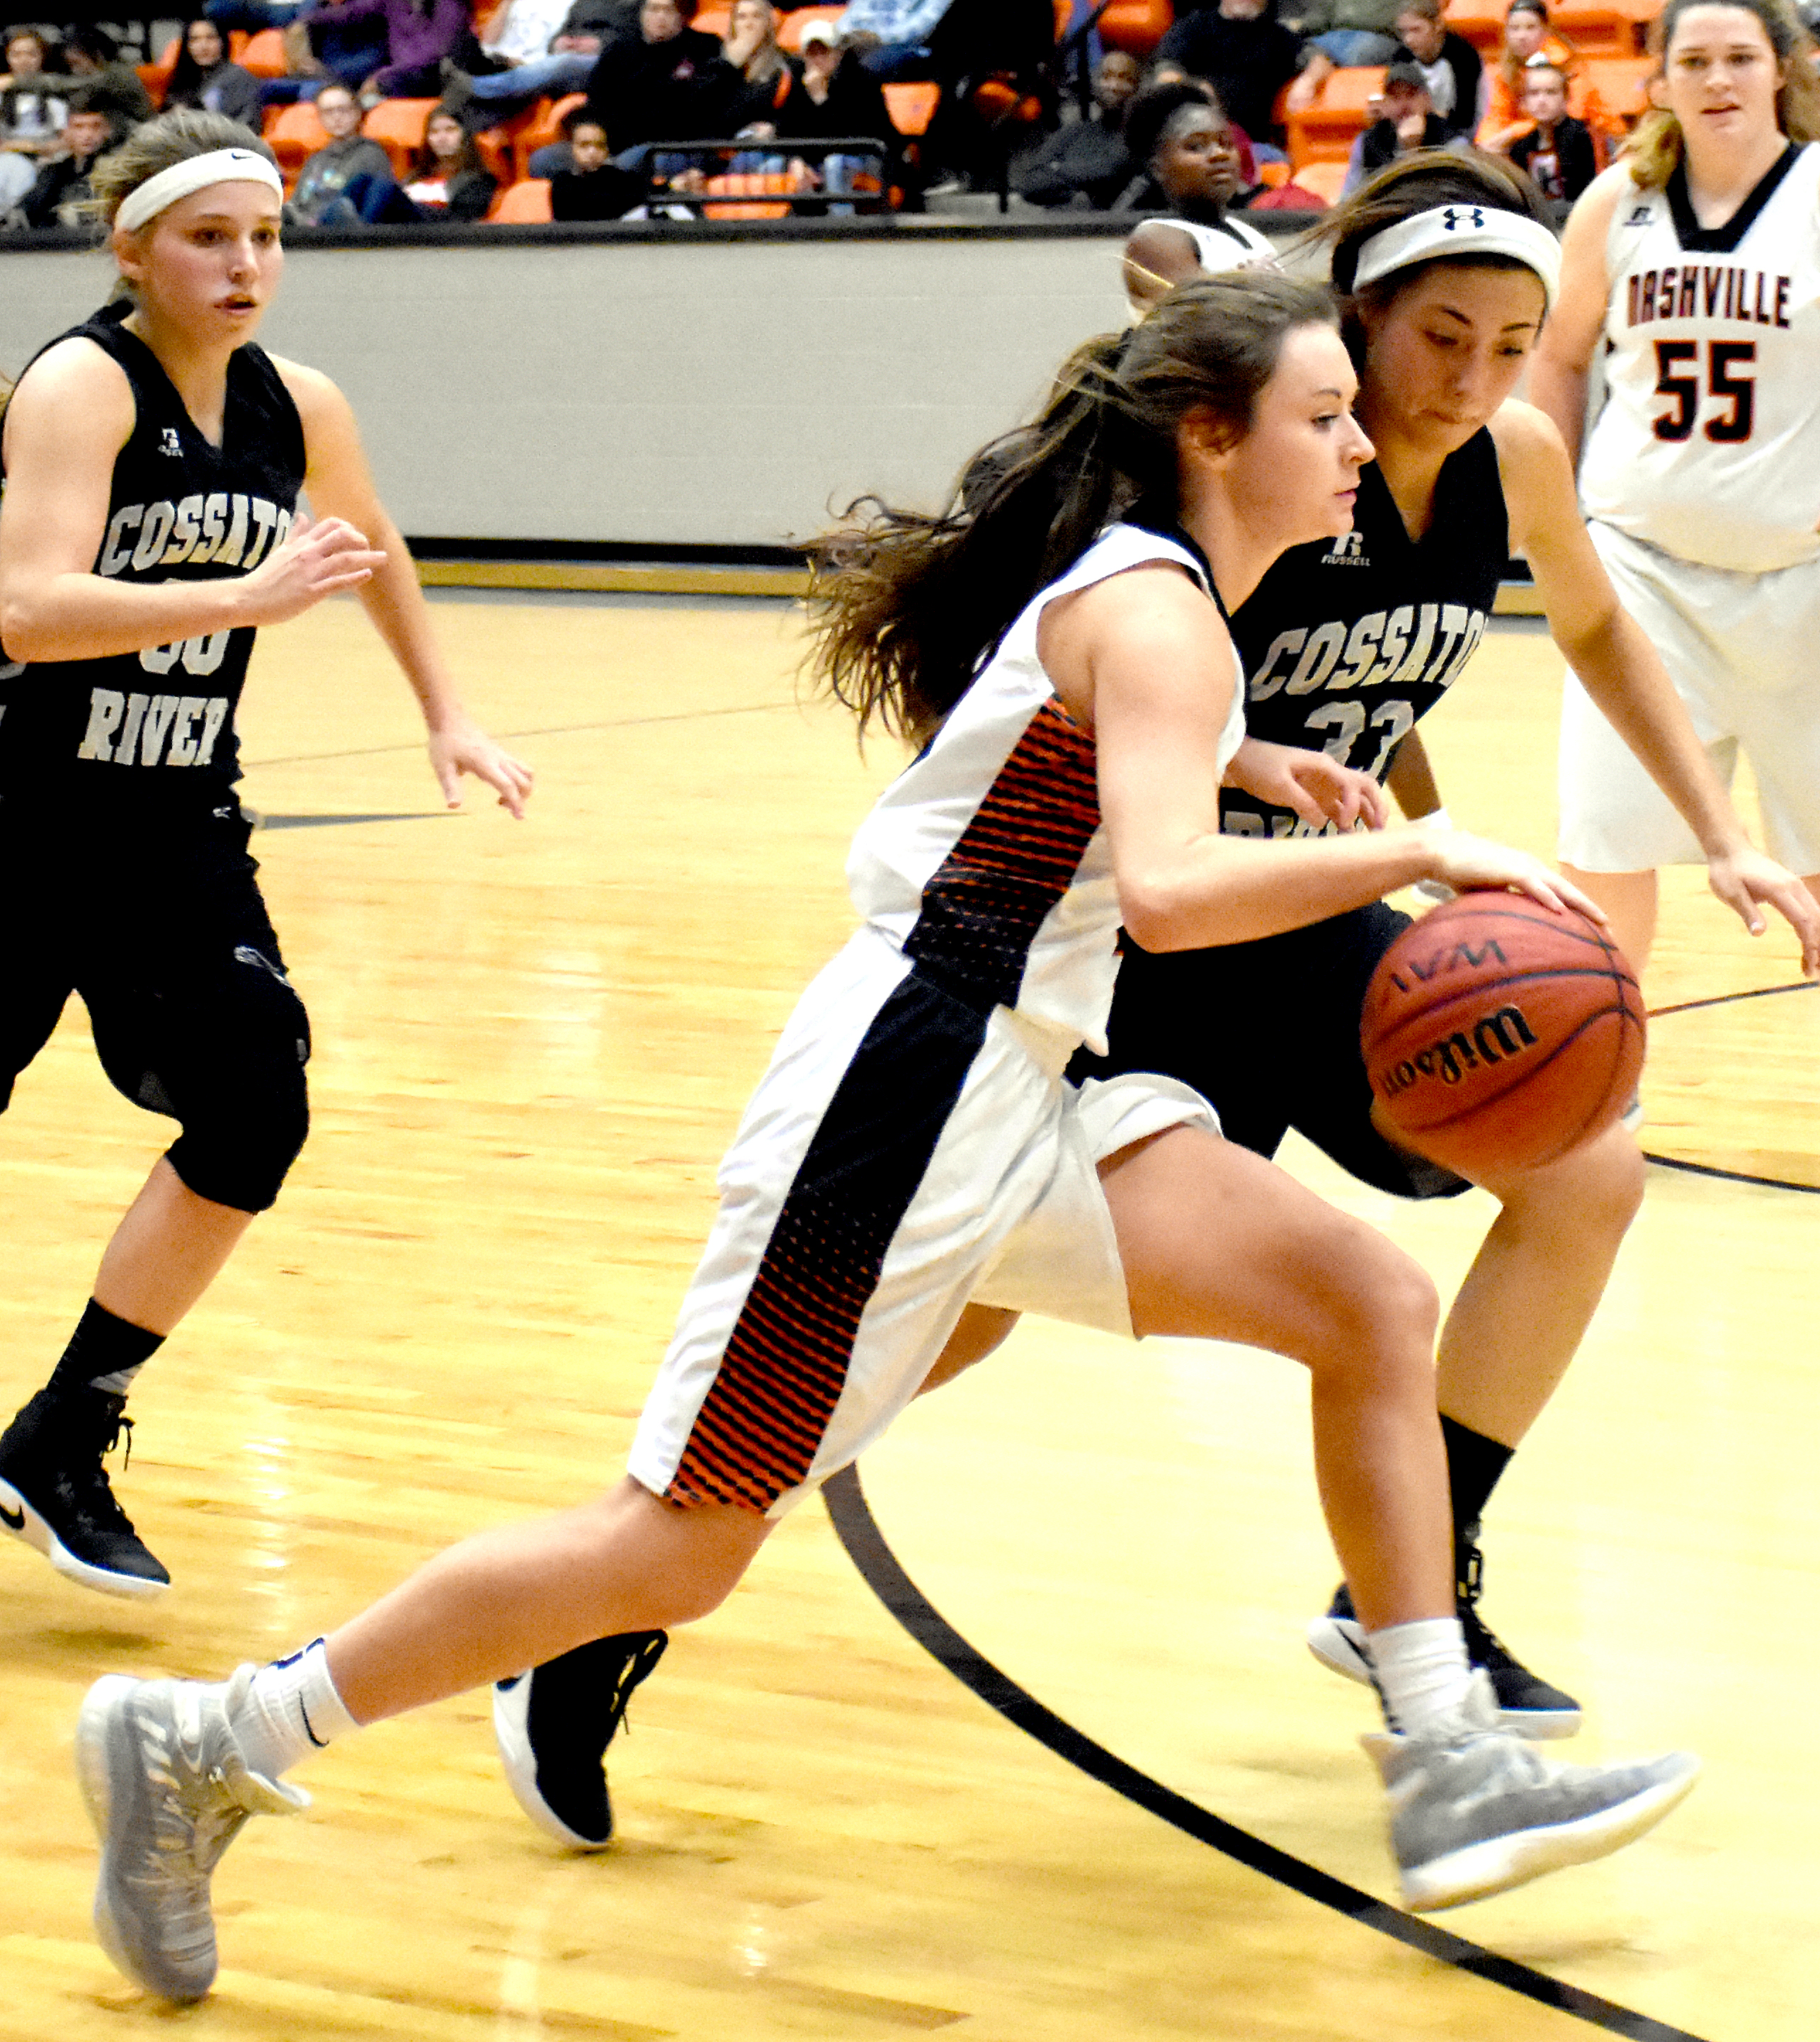 Kendall Kirchoff controls the ball for the Scrapperettes in their 54-52 overtime victory over Cossatot River Dec. 20 at Scrapper Arena. The Scrapperettes will return to the court this week at the Cossatot River Tournament. They will also host Genoa Friday night.